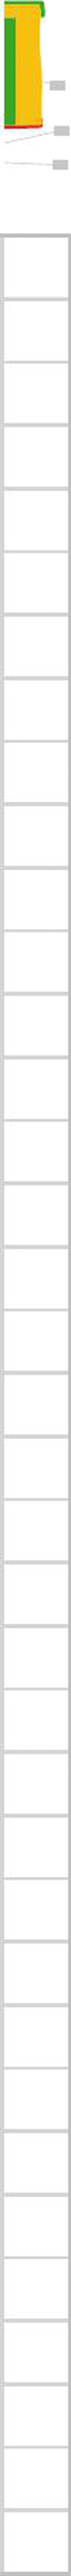 Graph Paper Template 1 Page 4